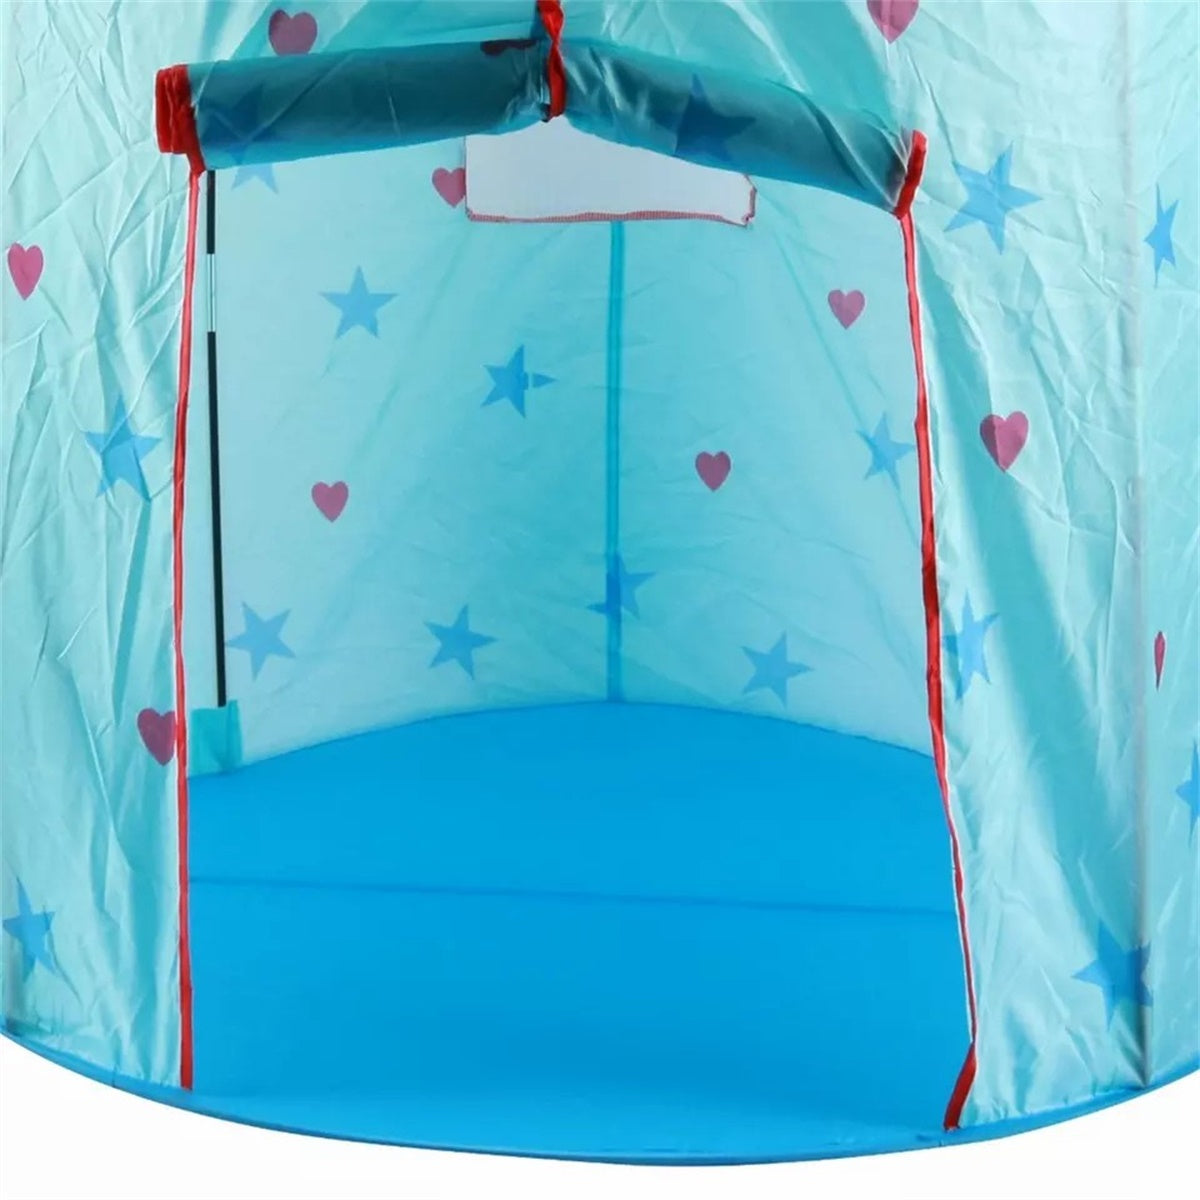 Princess Castle Play Tent, Kids Foldable Games Tent House Toy for Indoor & Outdoor